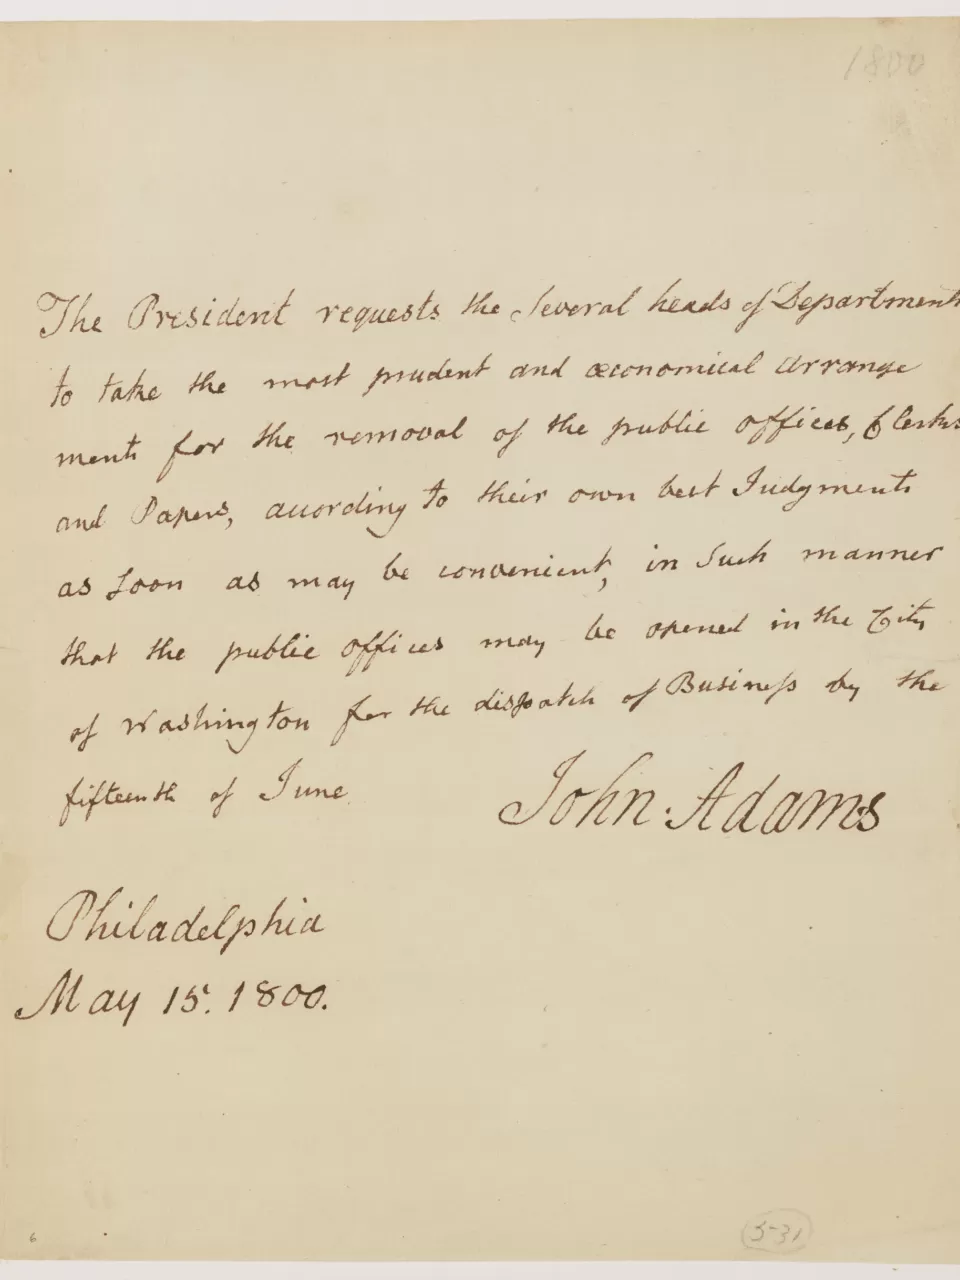 Letter from John Adams requesting the government move to Washington, D.C.